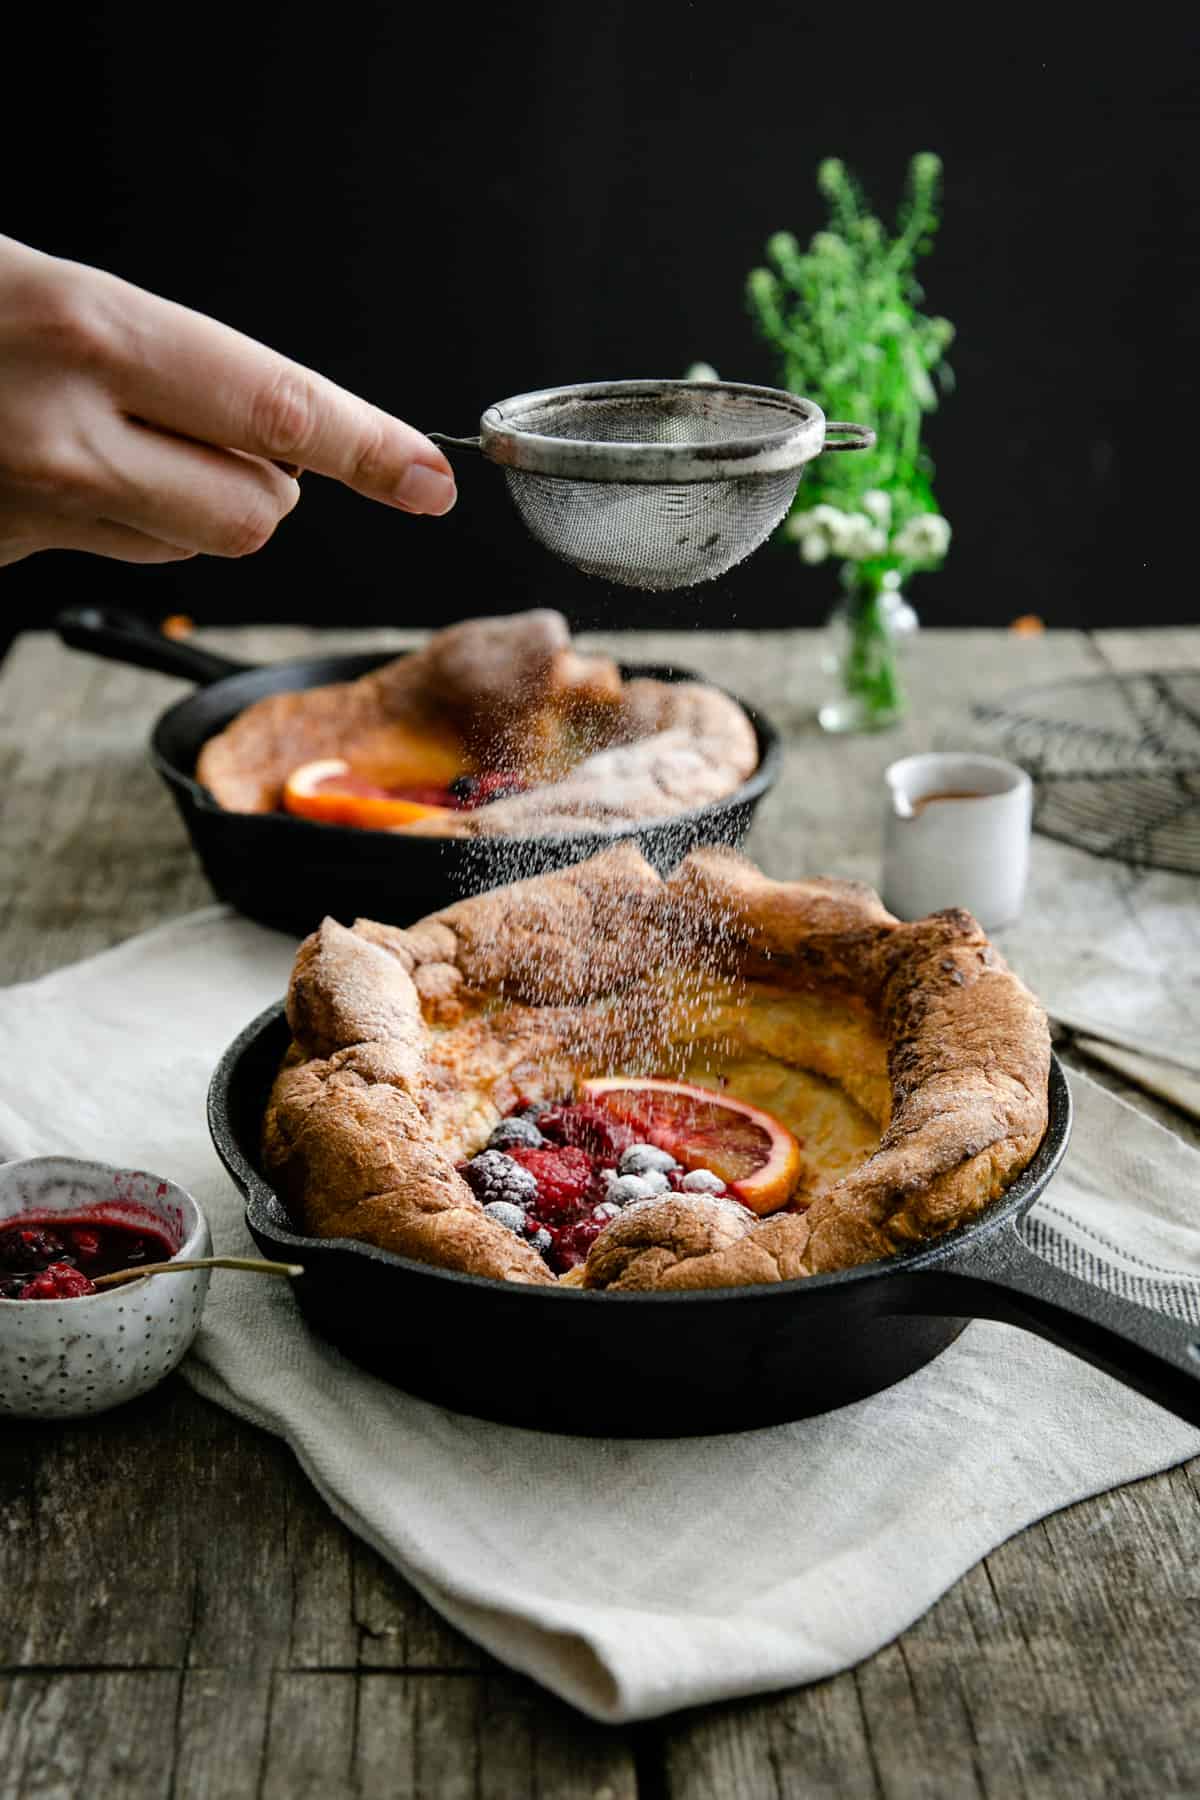 Icing sugar being sprinkled on Dutch baby pancake with mixed berries